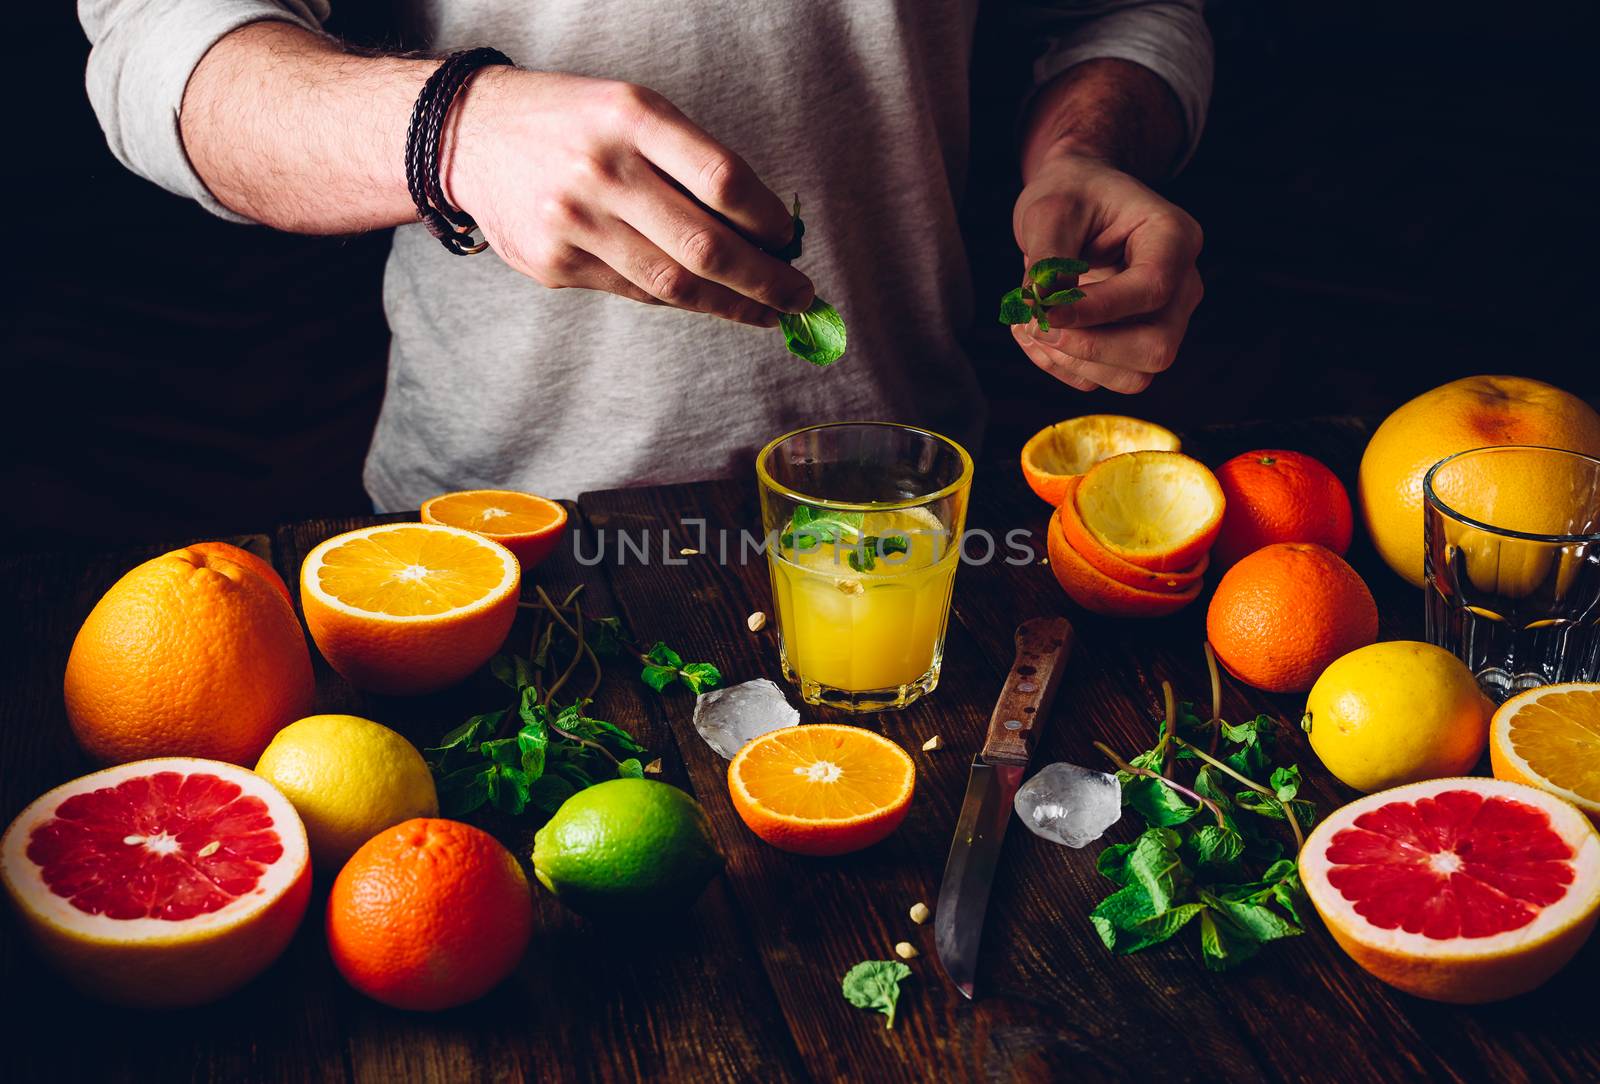 Guy Prepare the Citrus Cocktail with Ice and Mint. Some Ingredients on Table.